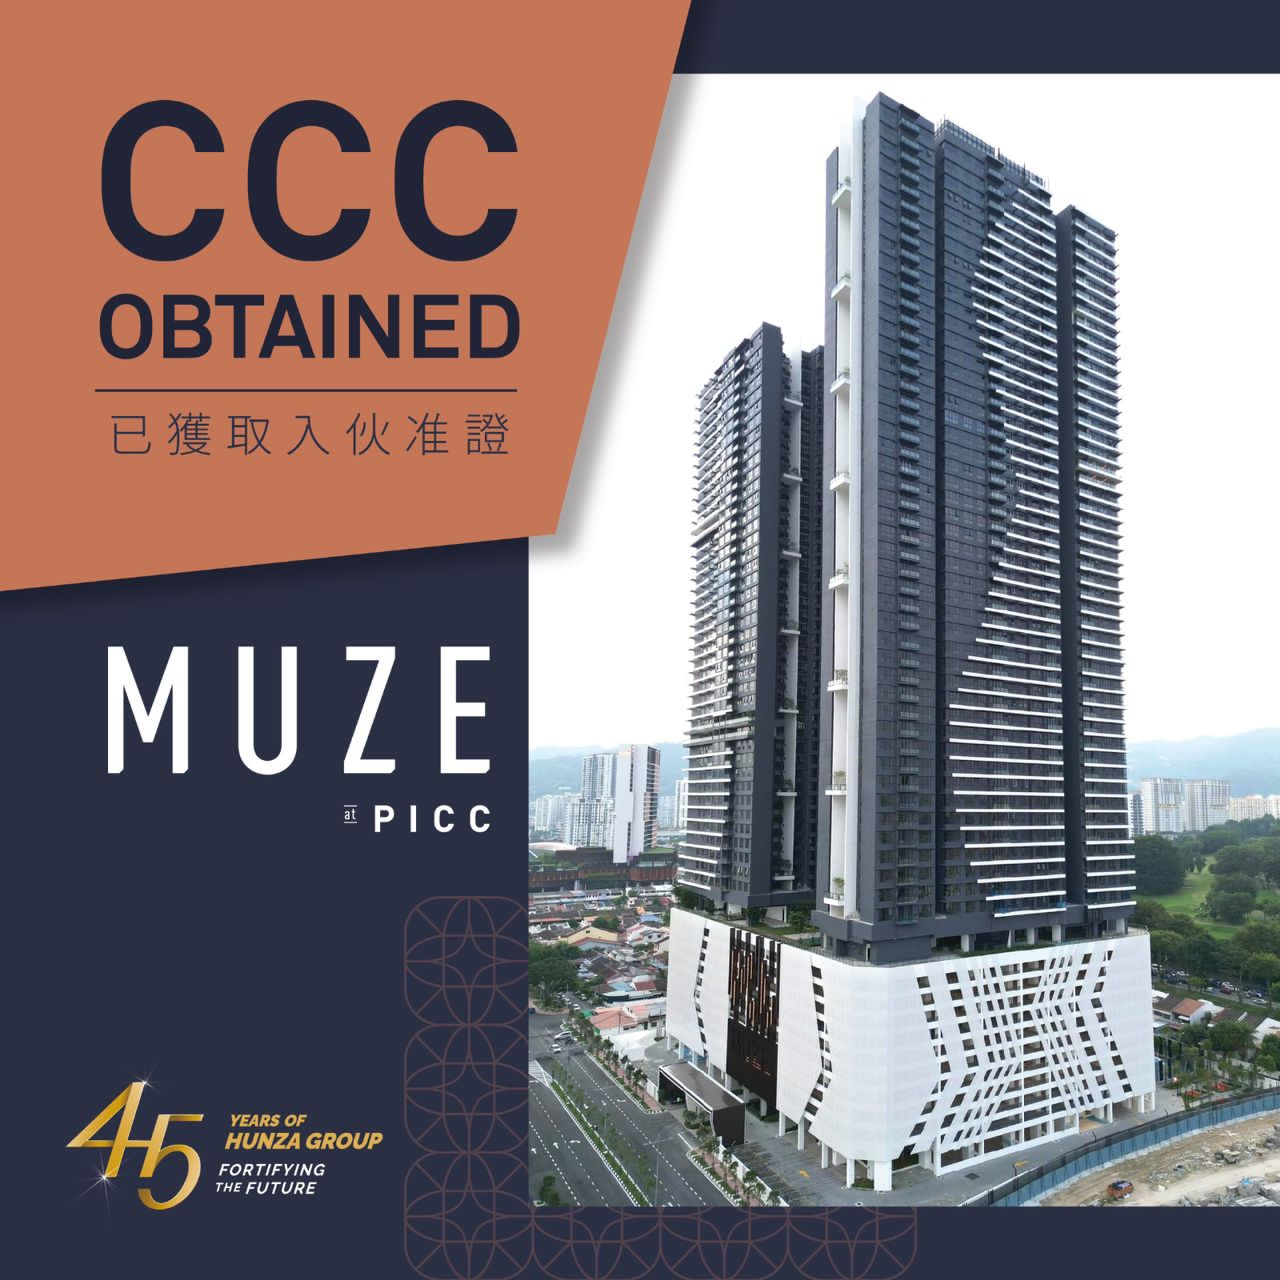 muze picc penang international commercial city hunza jade land properties ccc completion